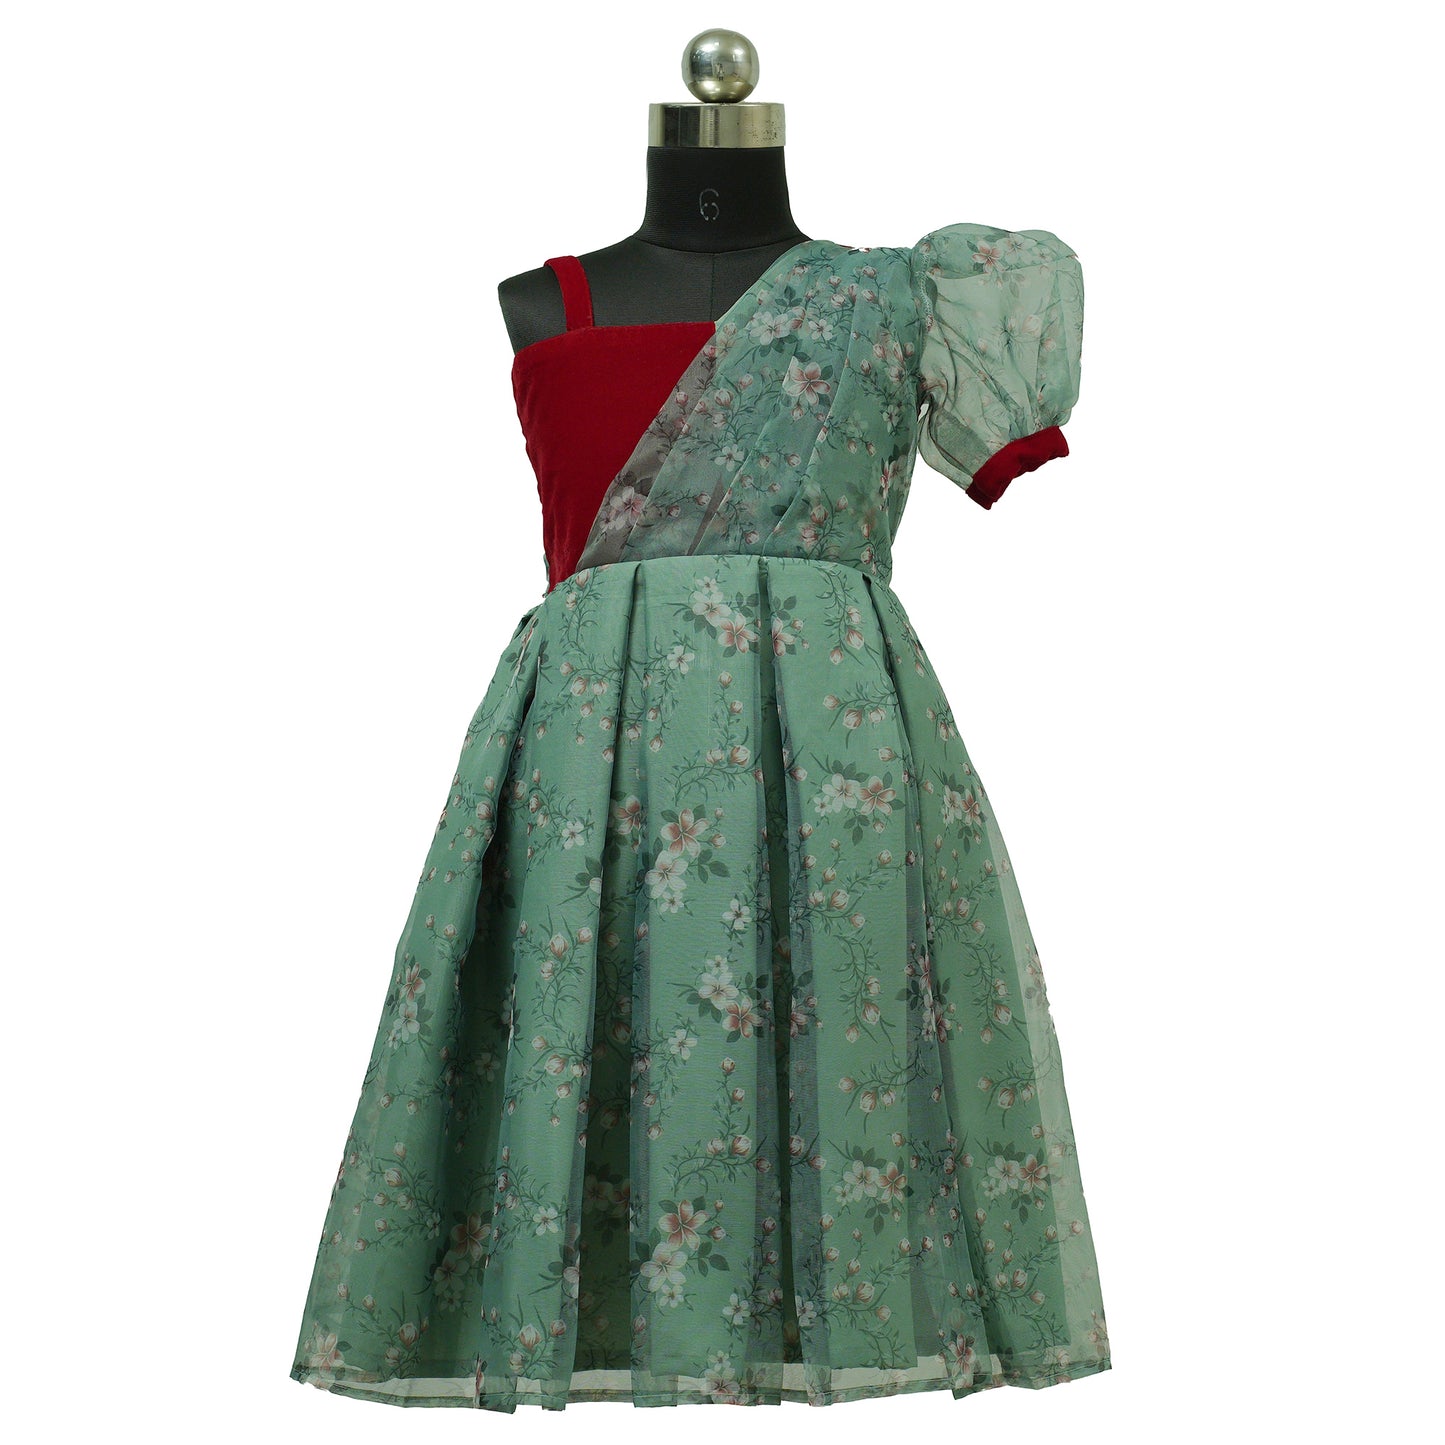 HEYKIDOO Designer christmas frocks for childrens kids clothing Green & Red latest designer dresses girls stylish comfortable birthday Party frock 6 years old beautiful elegant velvet net floral printed party frock buy online shopping India